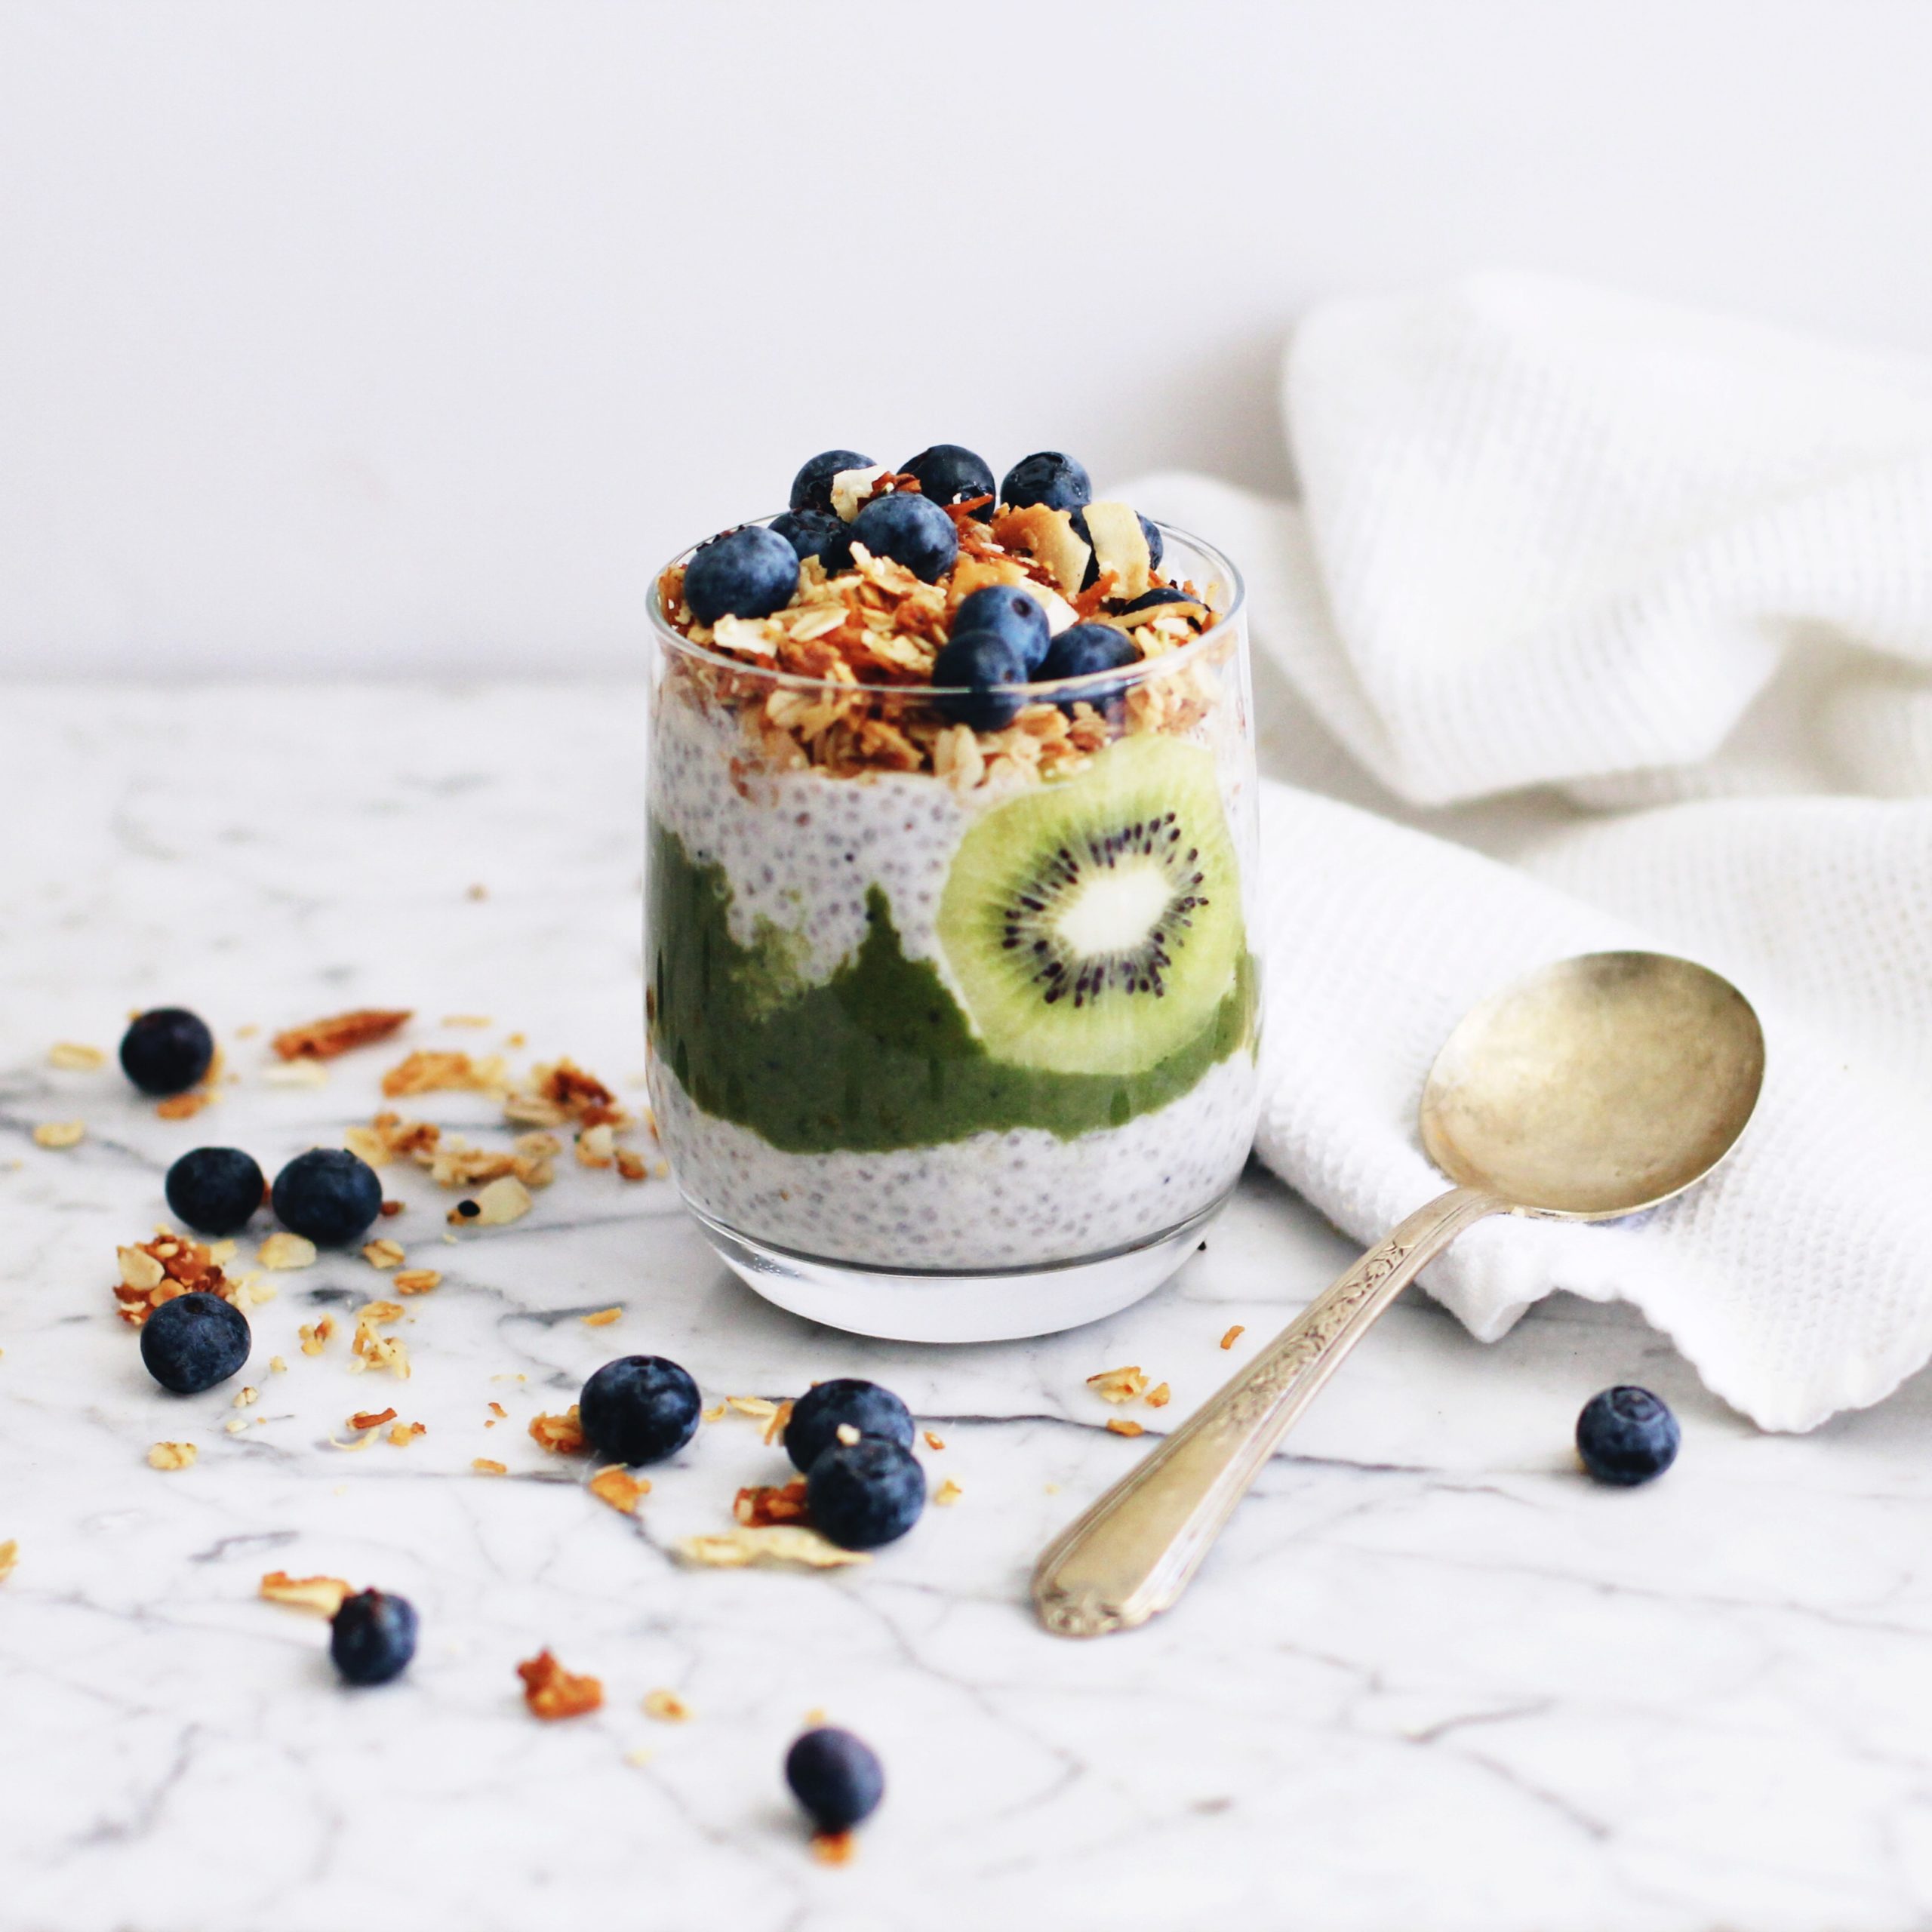 Superfood Overnight Oatmeal {Healthy Meal Prep 2 Ways} - Cotter Crunch